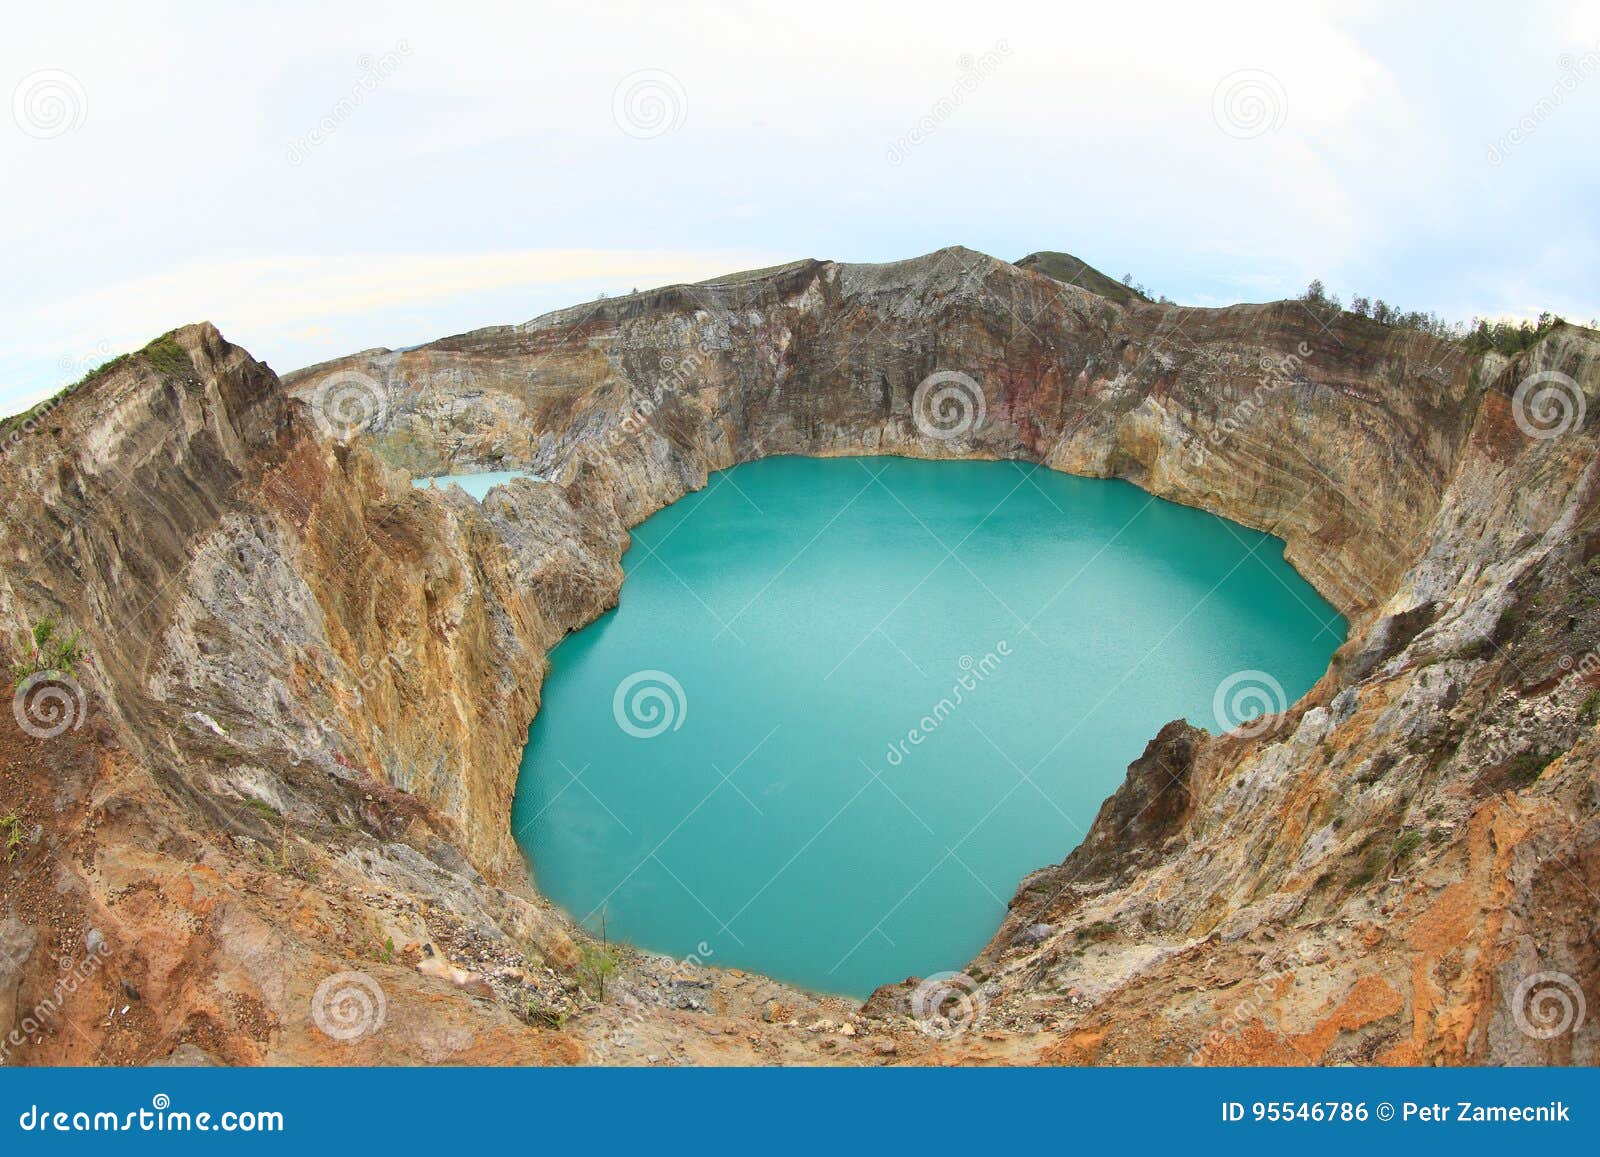 volcano on kelimutu - unique lakes tin and tap